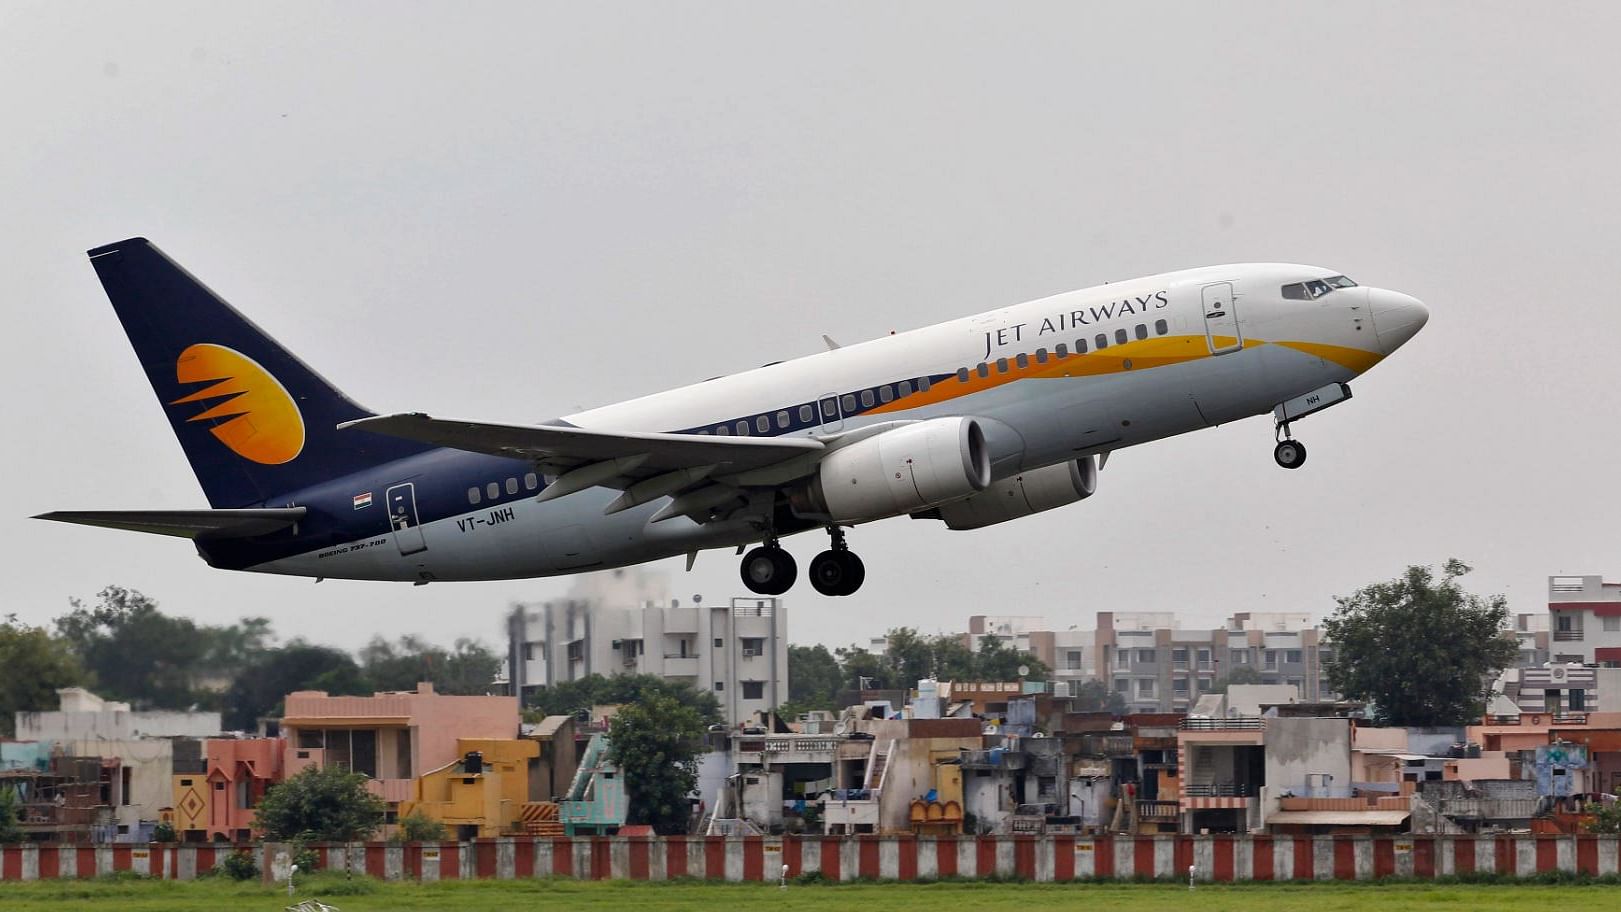 Air India Express, the international budget arm of Air India, is examining the possibility of leasing some Boeing 737 aircraft of grounded carrier Jet Airways.